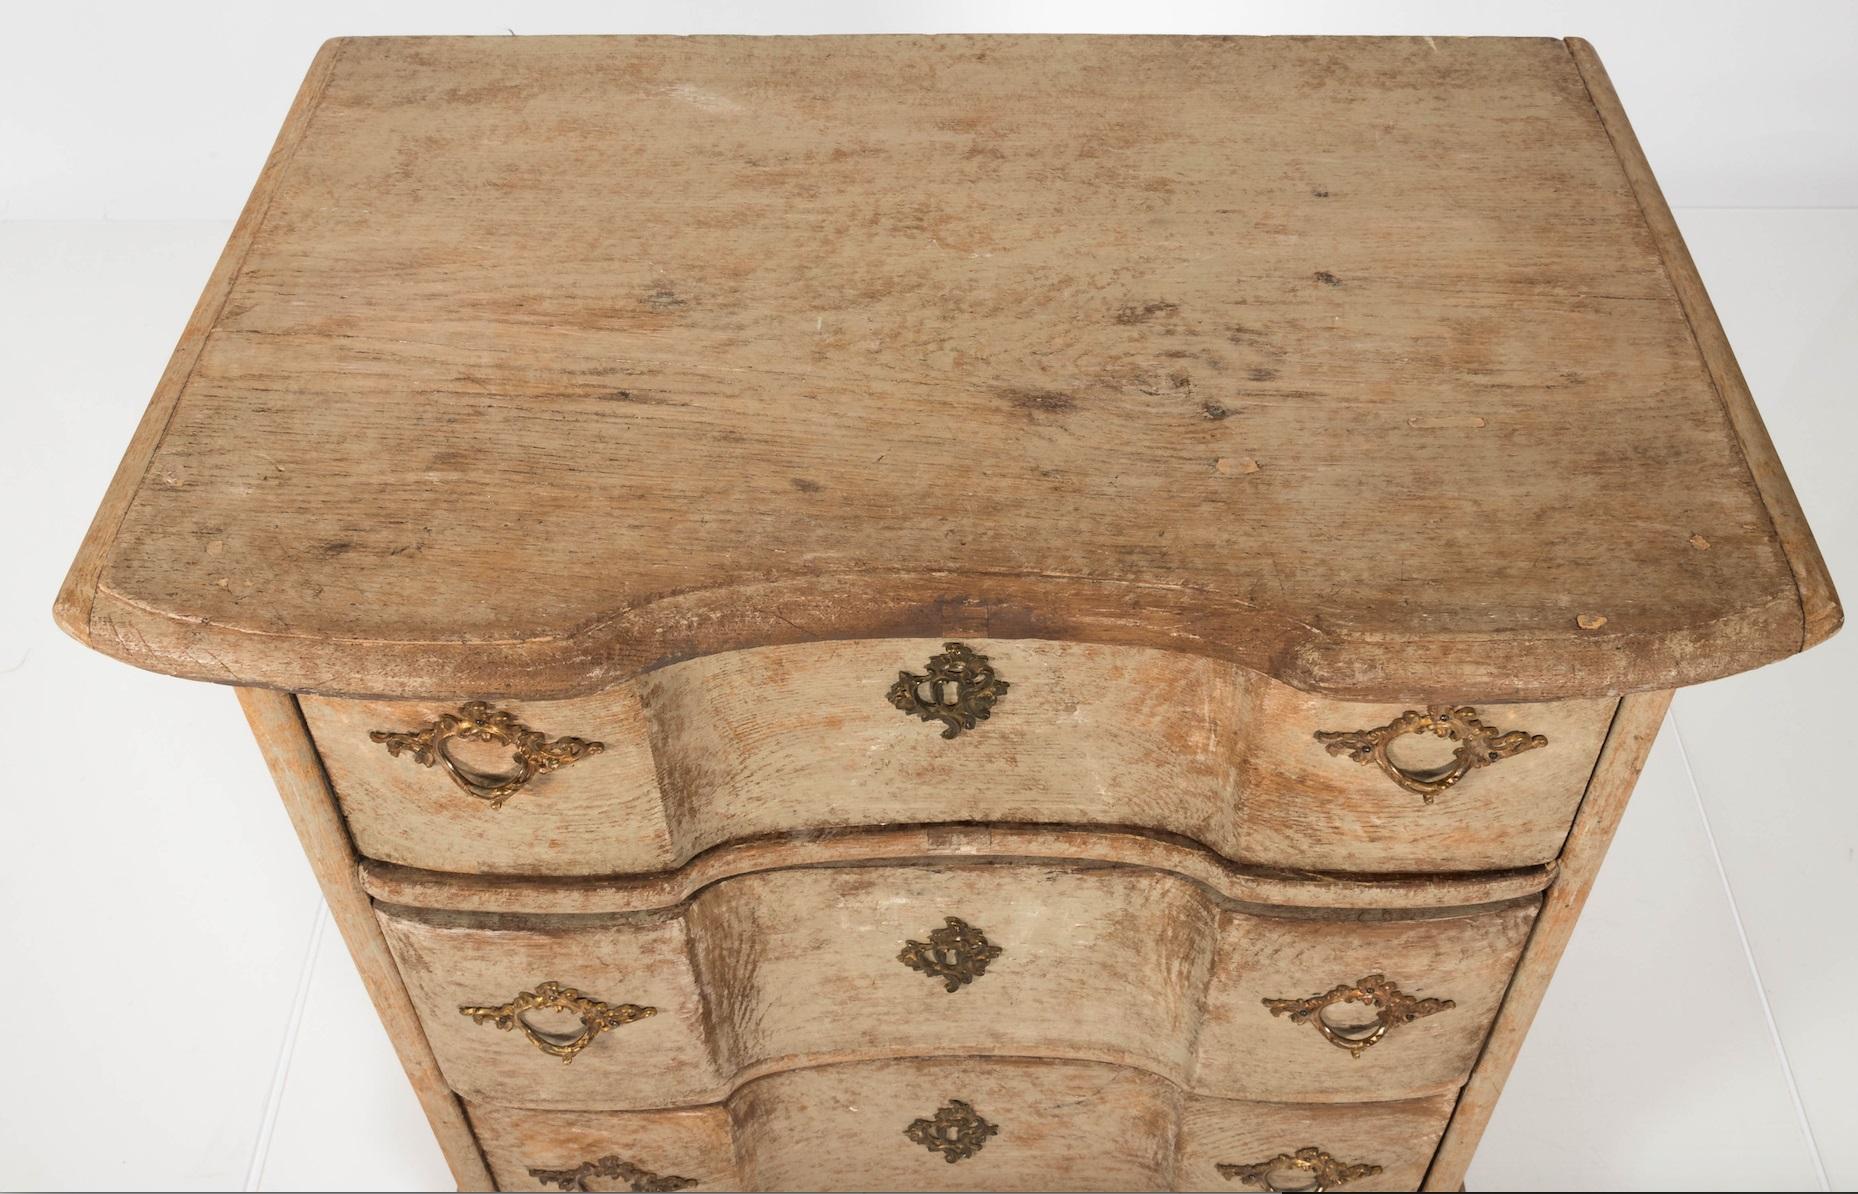 Exceptional Gustavian three-drawer dresser with historic paint, made in Sweden circa 1750. This Swedish commode is painted a natural ecru hue that complements the warm pine wood showing underneath the surface. Honest age has given it the desirable